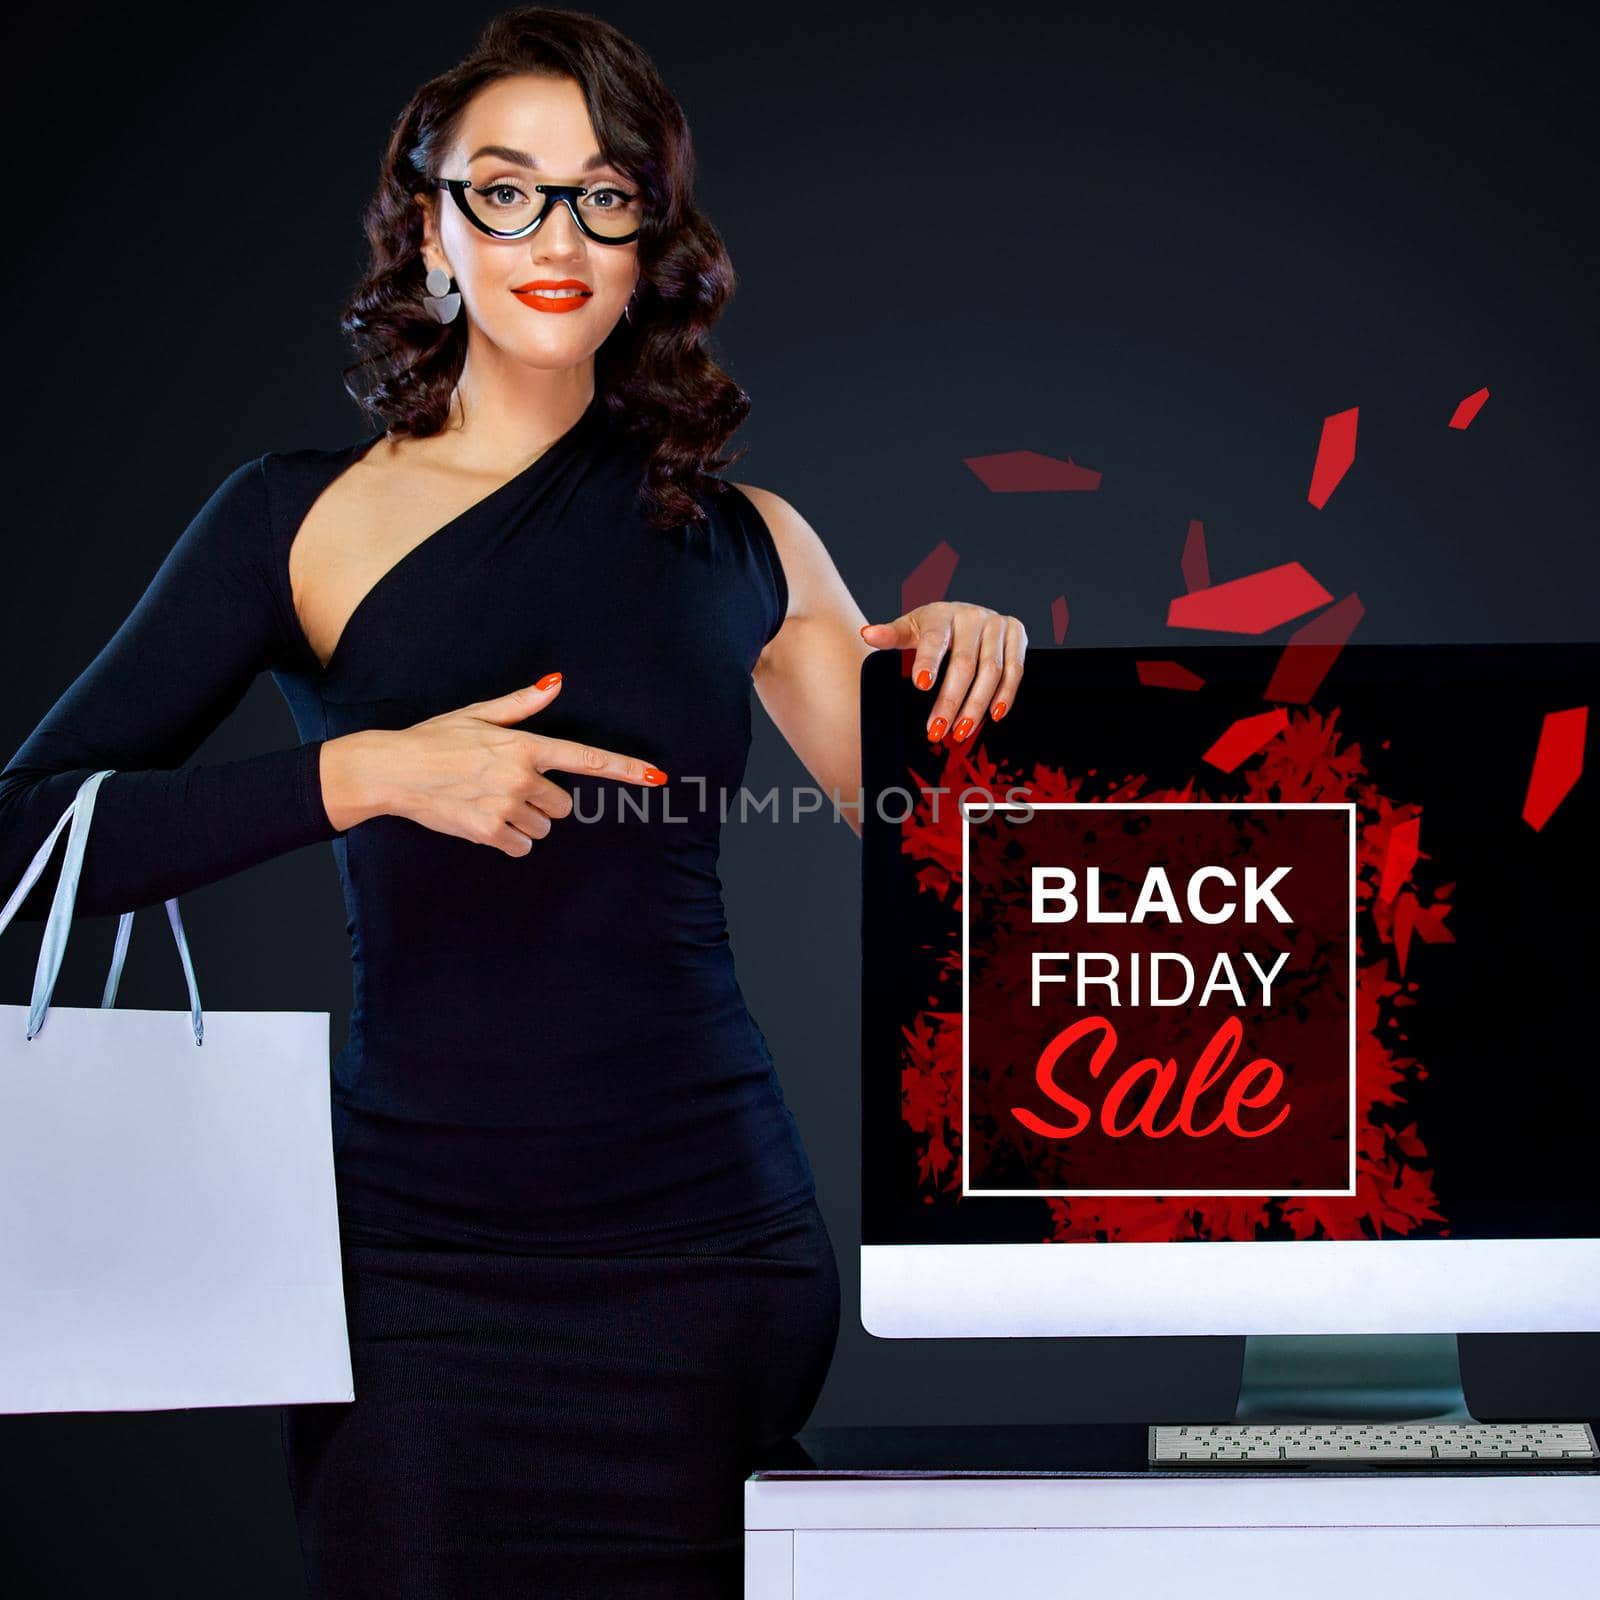 Black friday and Cyber Monday sale concept for shop. Shopping woman holding white bag and pointing on computer isolated on dark background by MikeOrlov